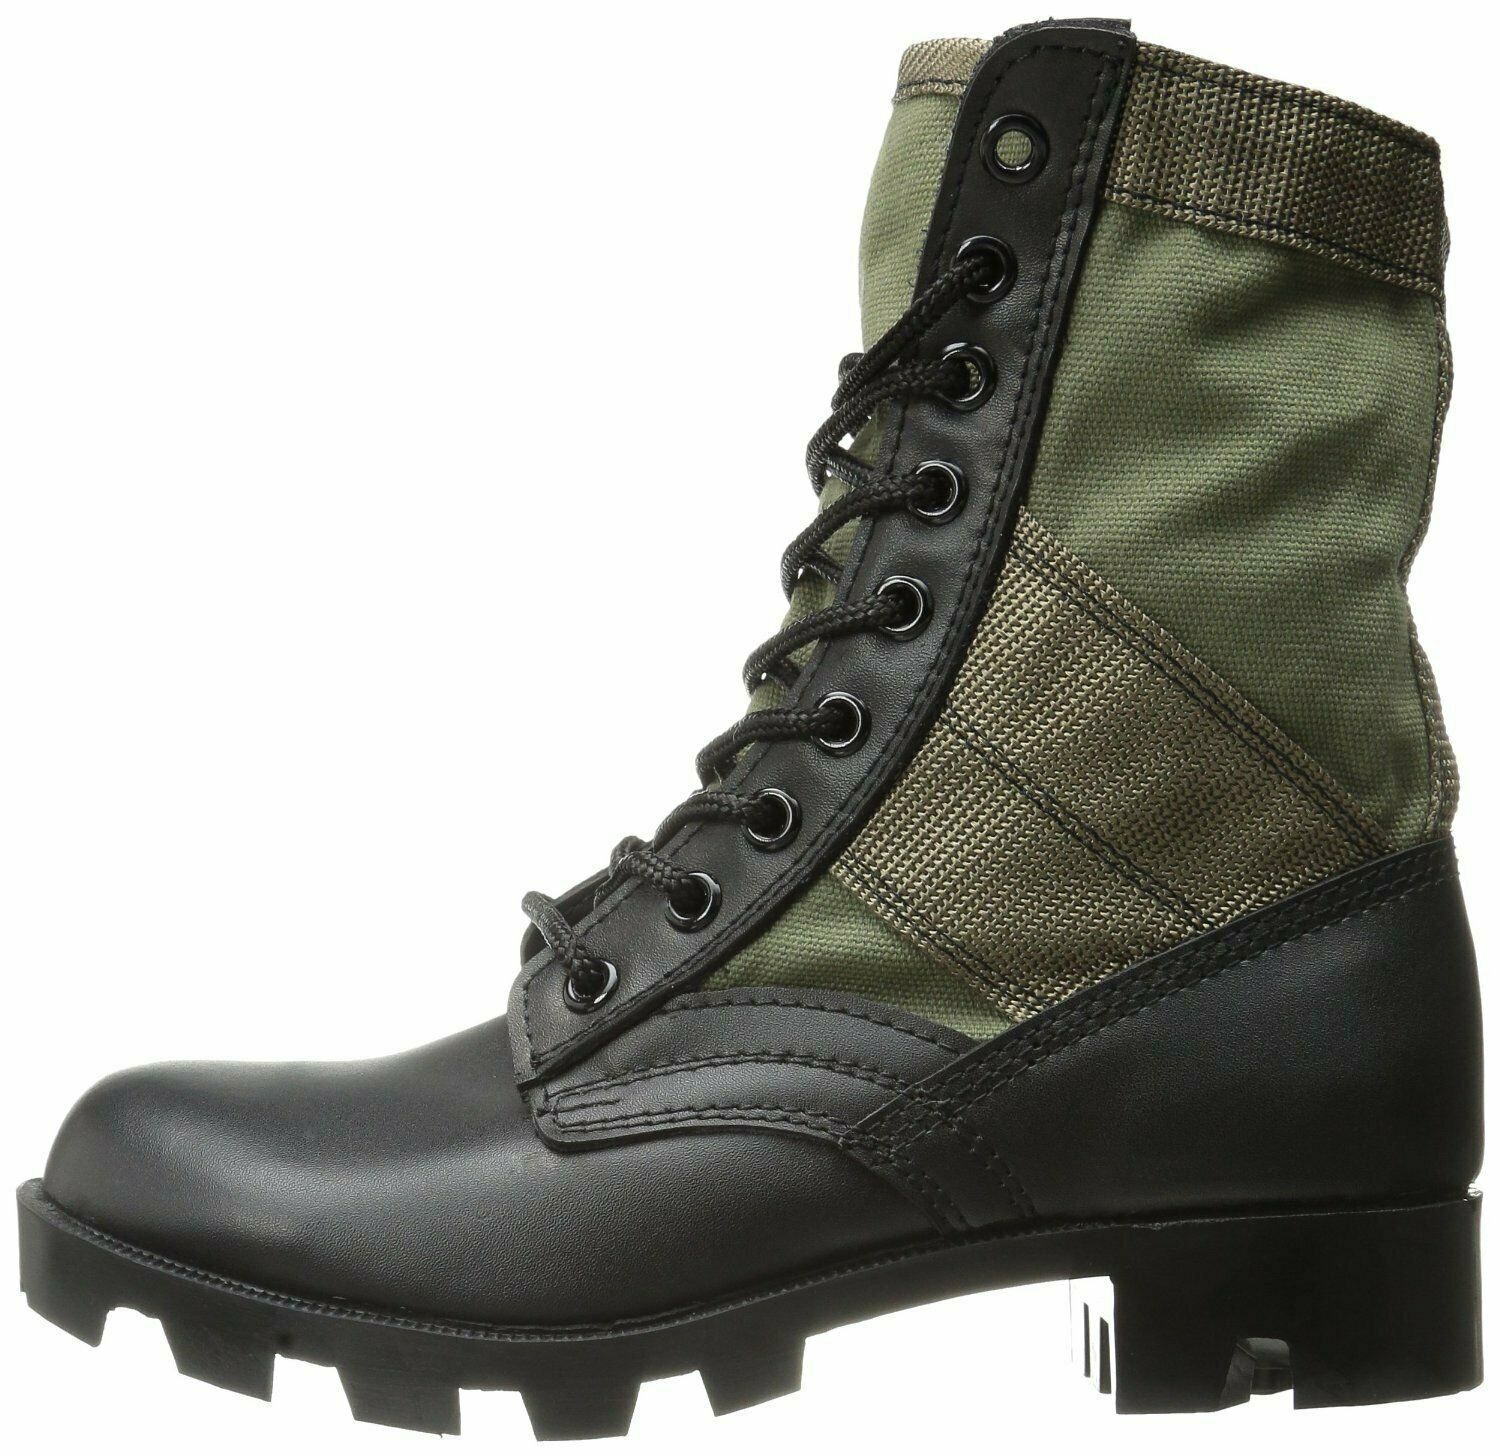 Olive Drab & Black Jungle Boots Military 8" Tactical Boots Boots